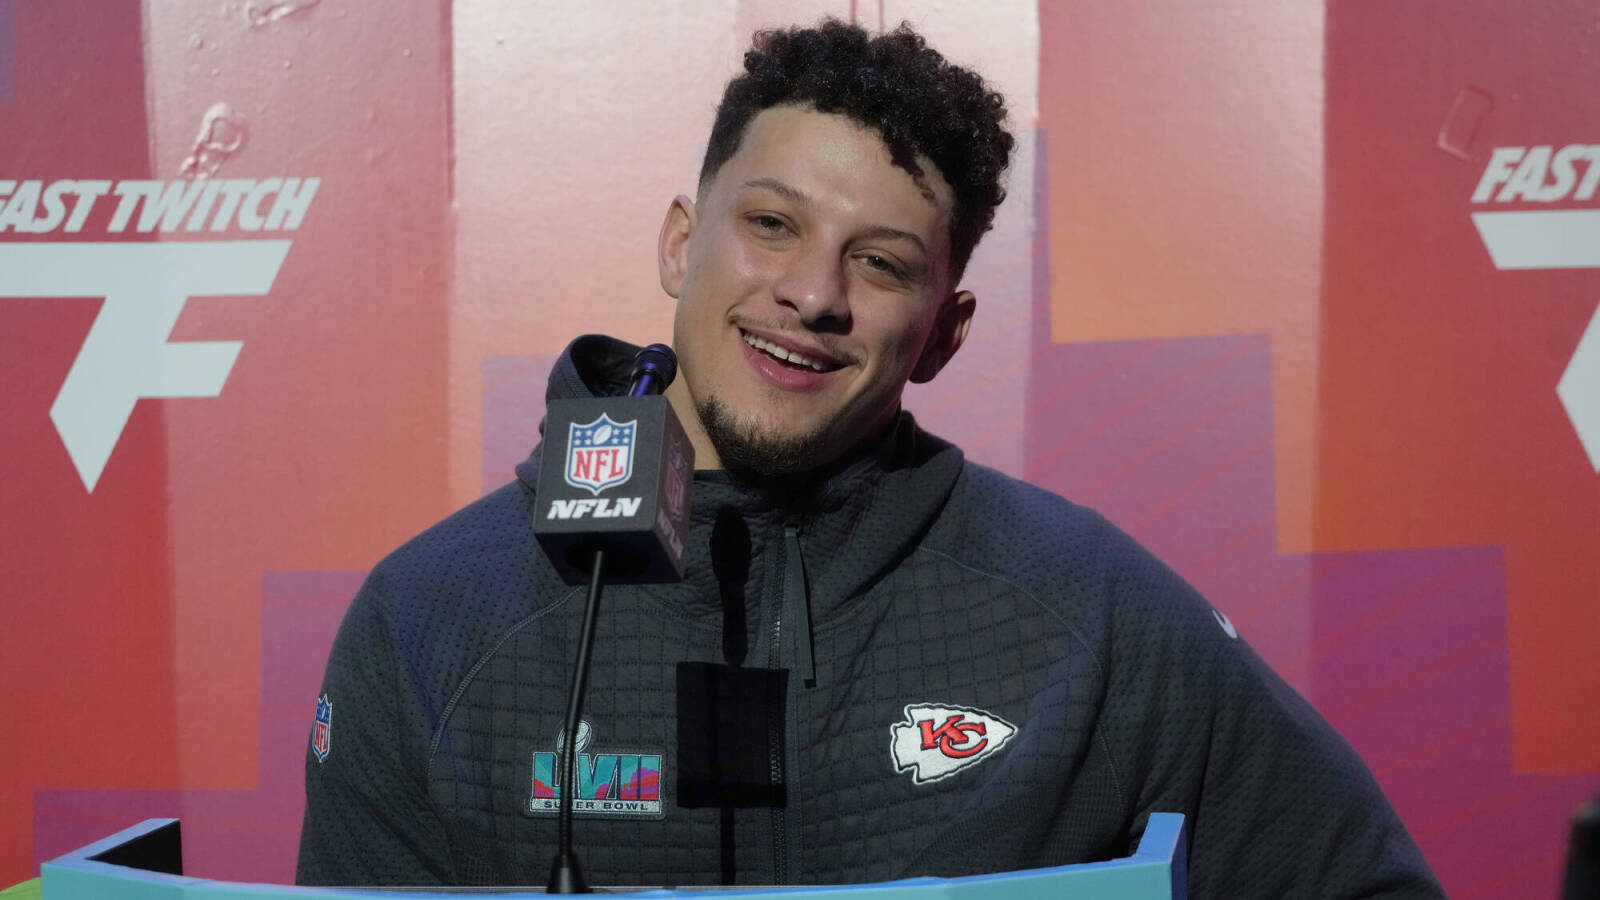 Patrick Mahomes makes strange promise to Cooper Manning if Chiefs win Super Bowl